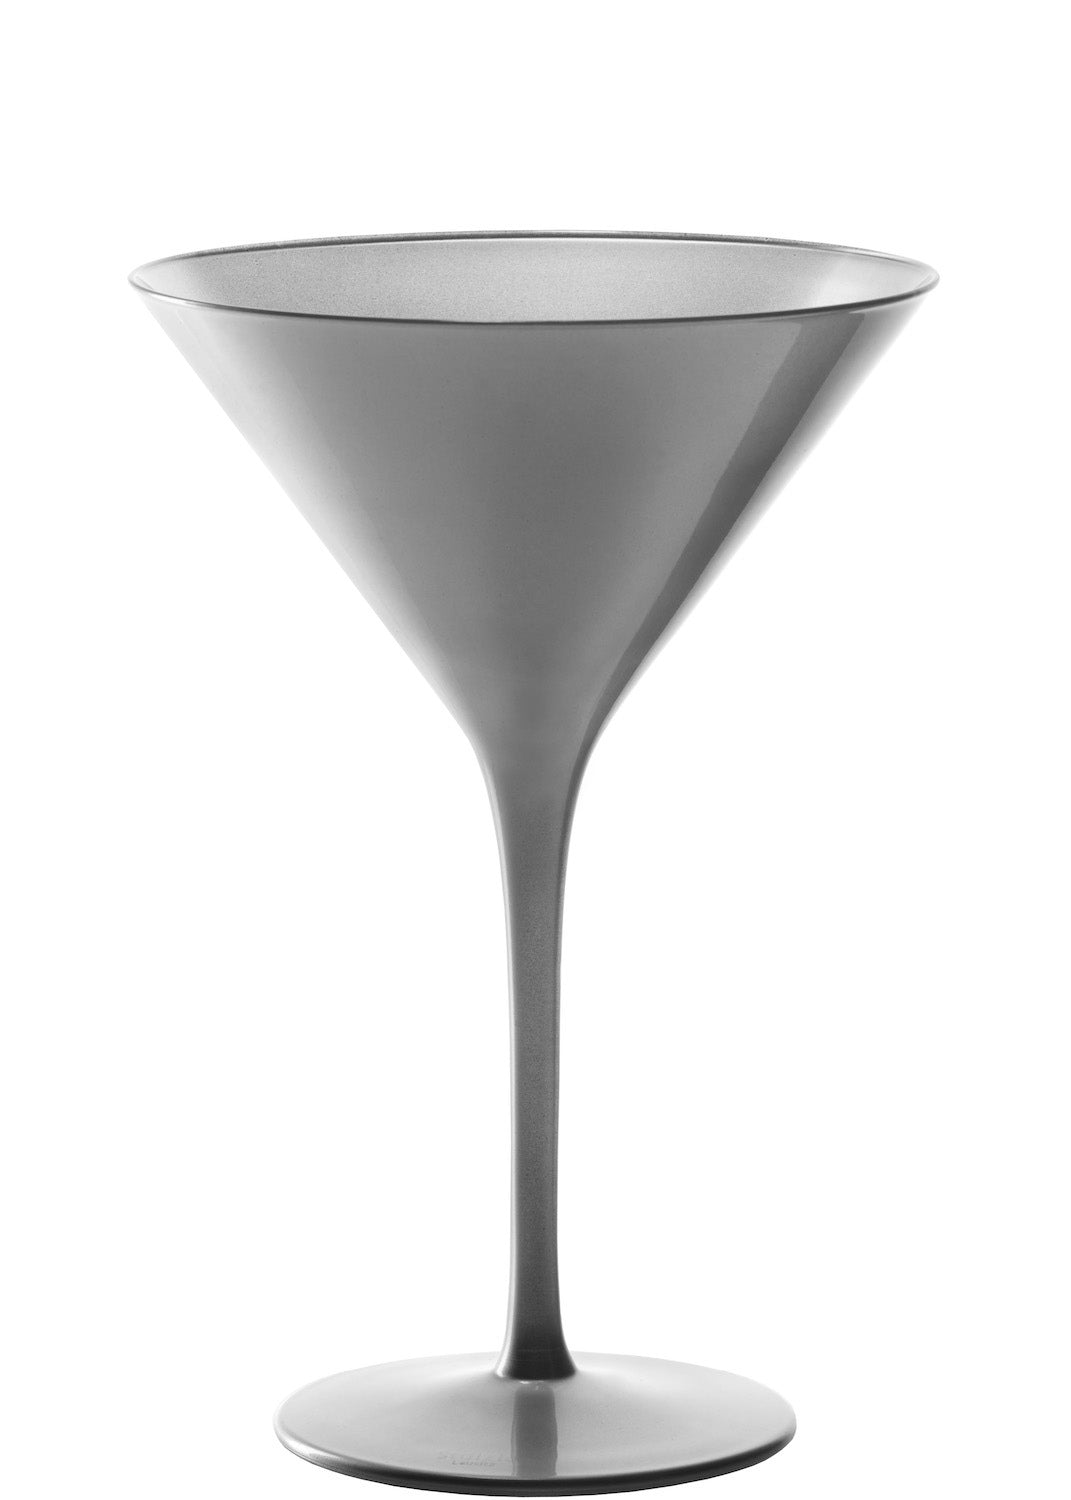 Bowl Set of Cocktail Elements 6 Silver